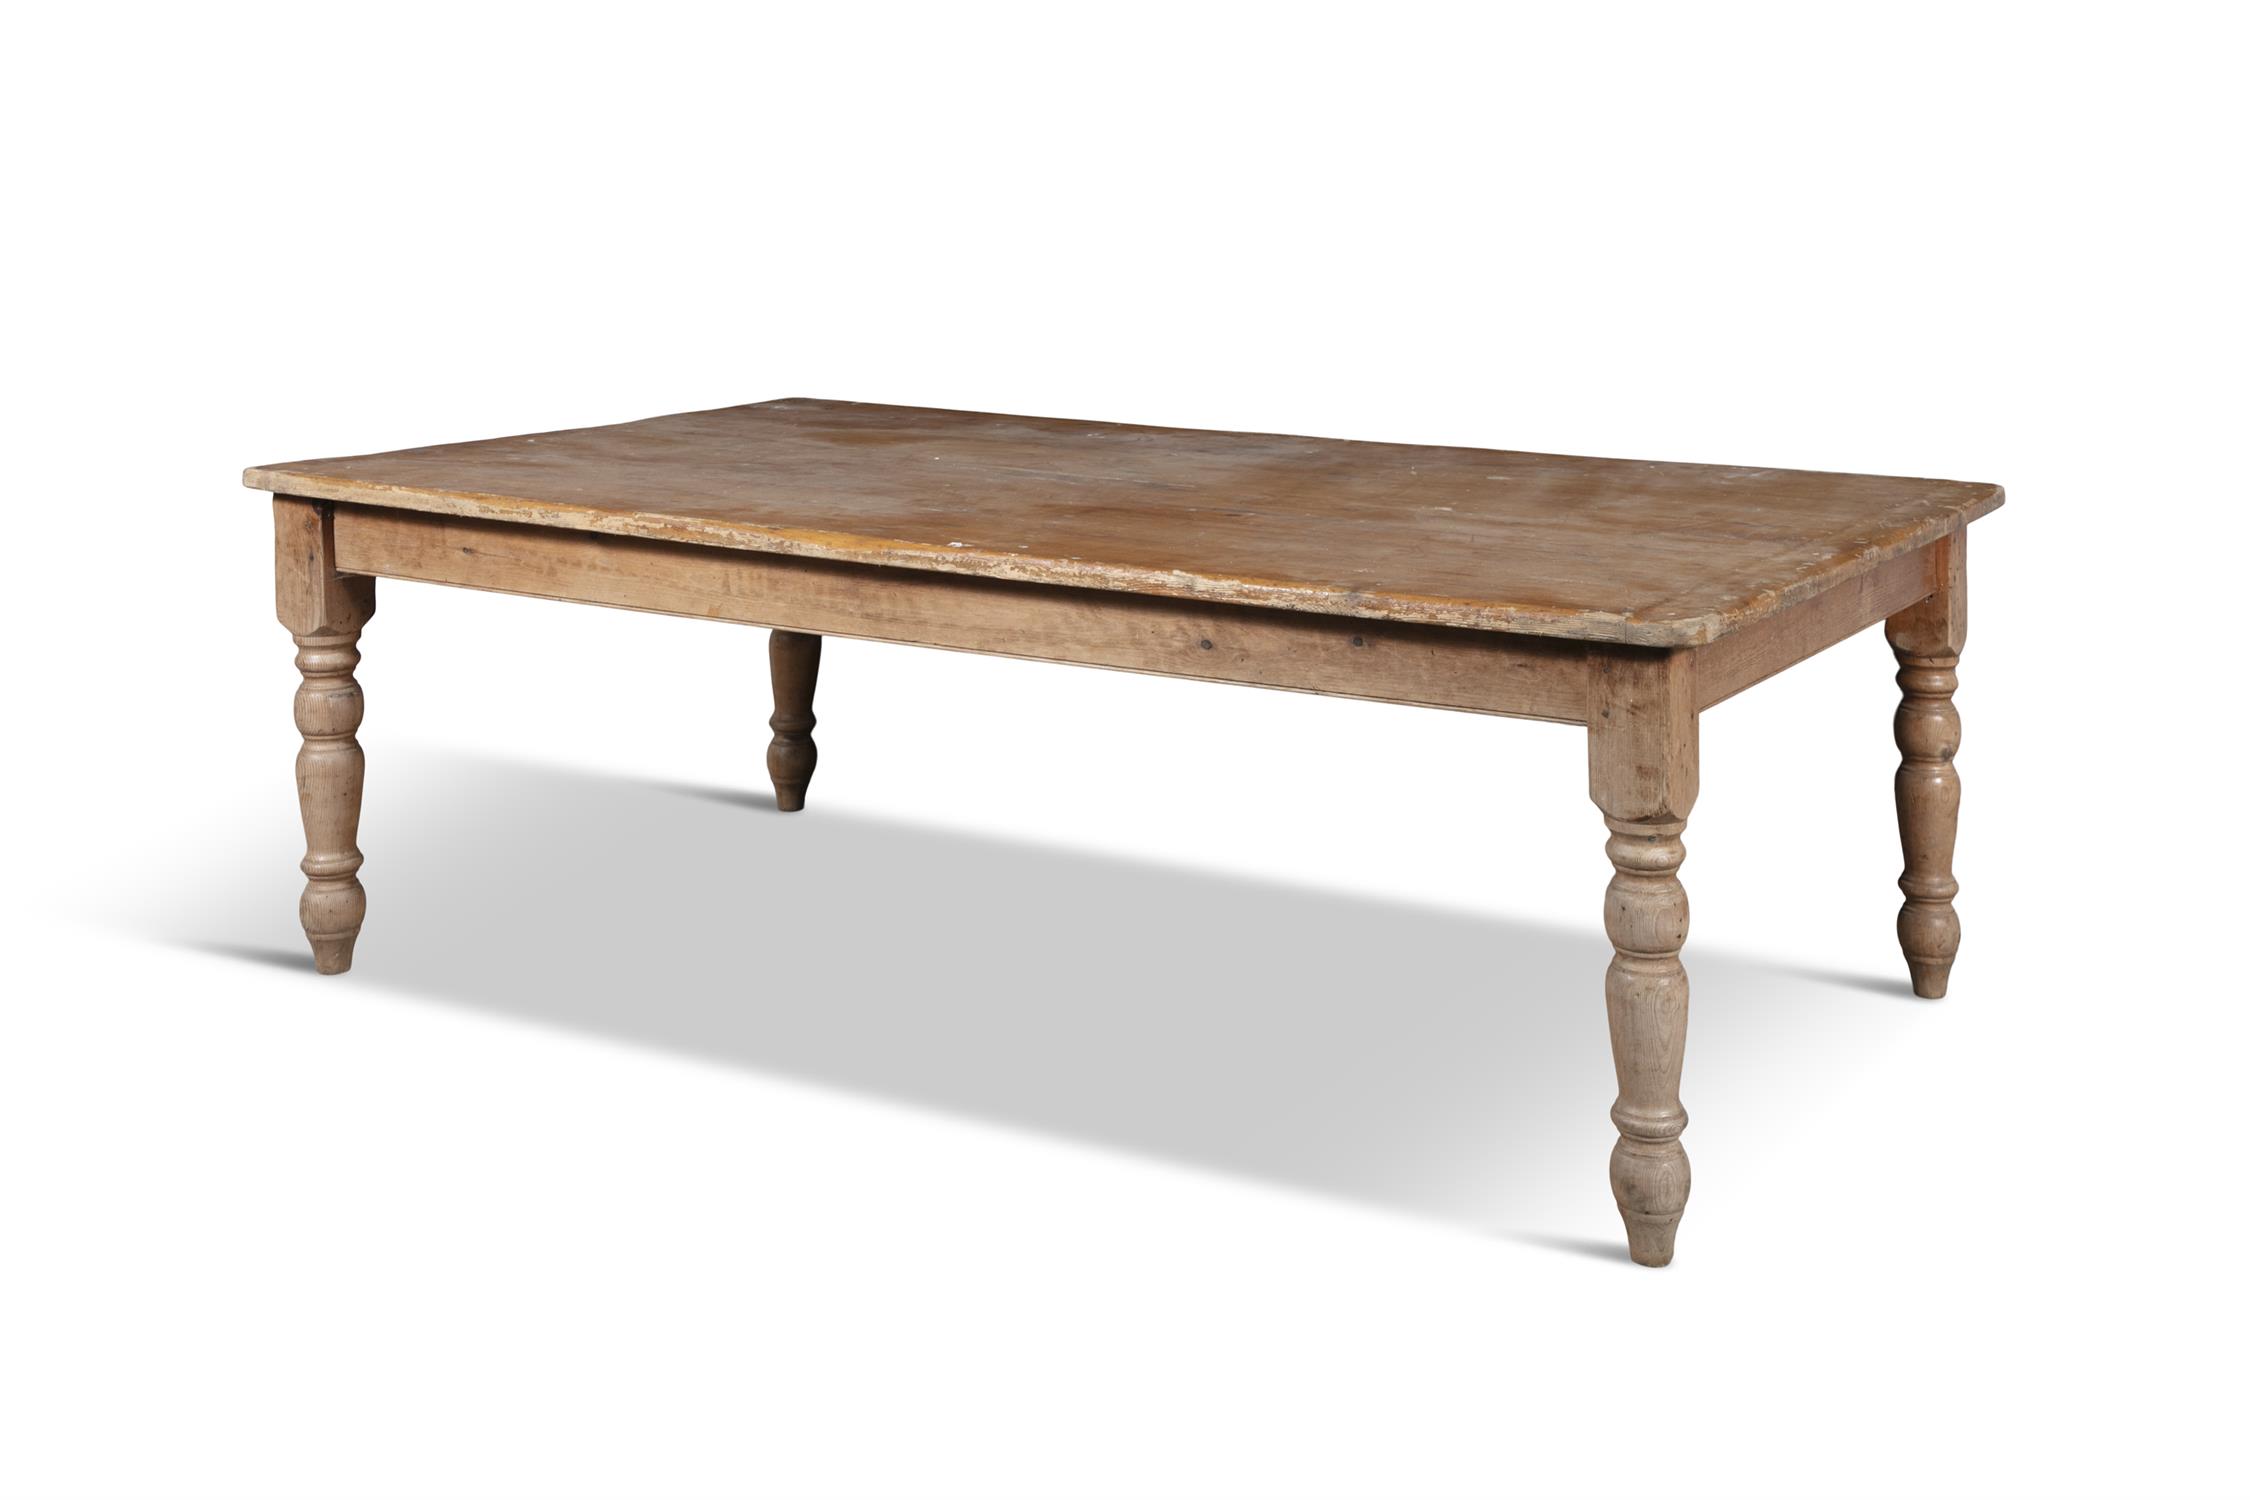 A LARGE PINE RECTANGULAR FARMHOUSE TABLE, LATE 19TH CENTURY, on turned tapering legs. - Image 3 of 10